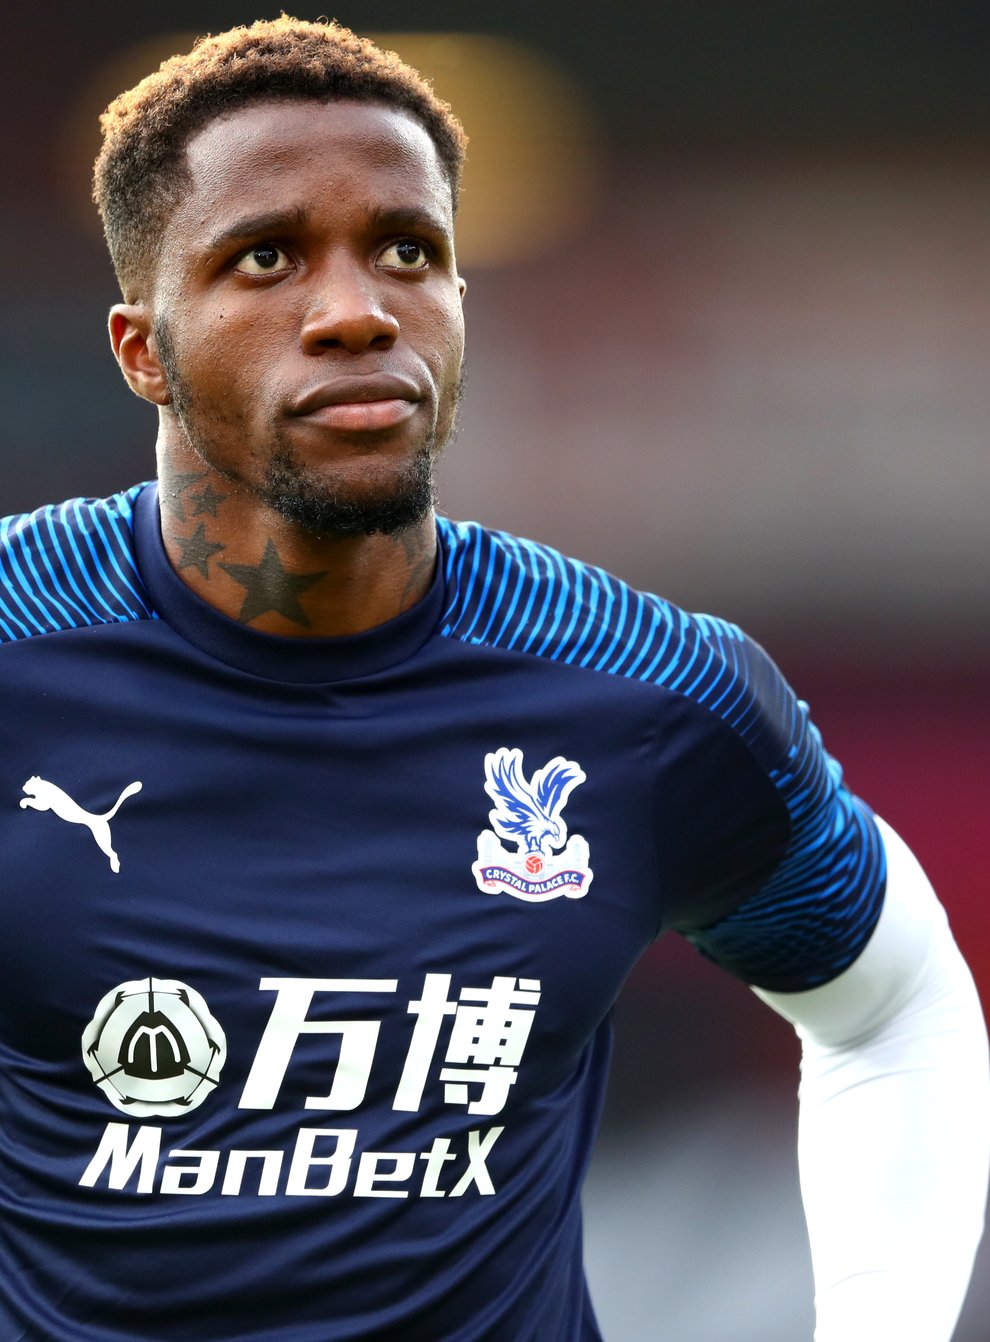 Wilfried Zaha is a doubt for Crystal Palace